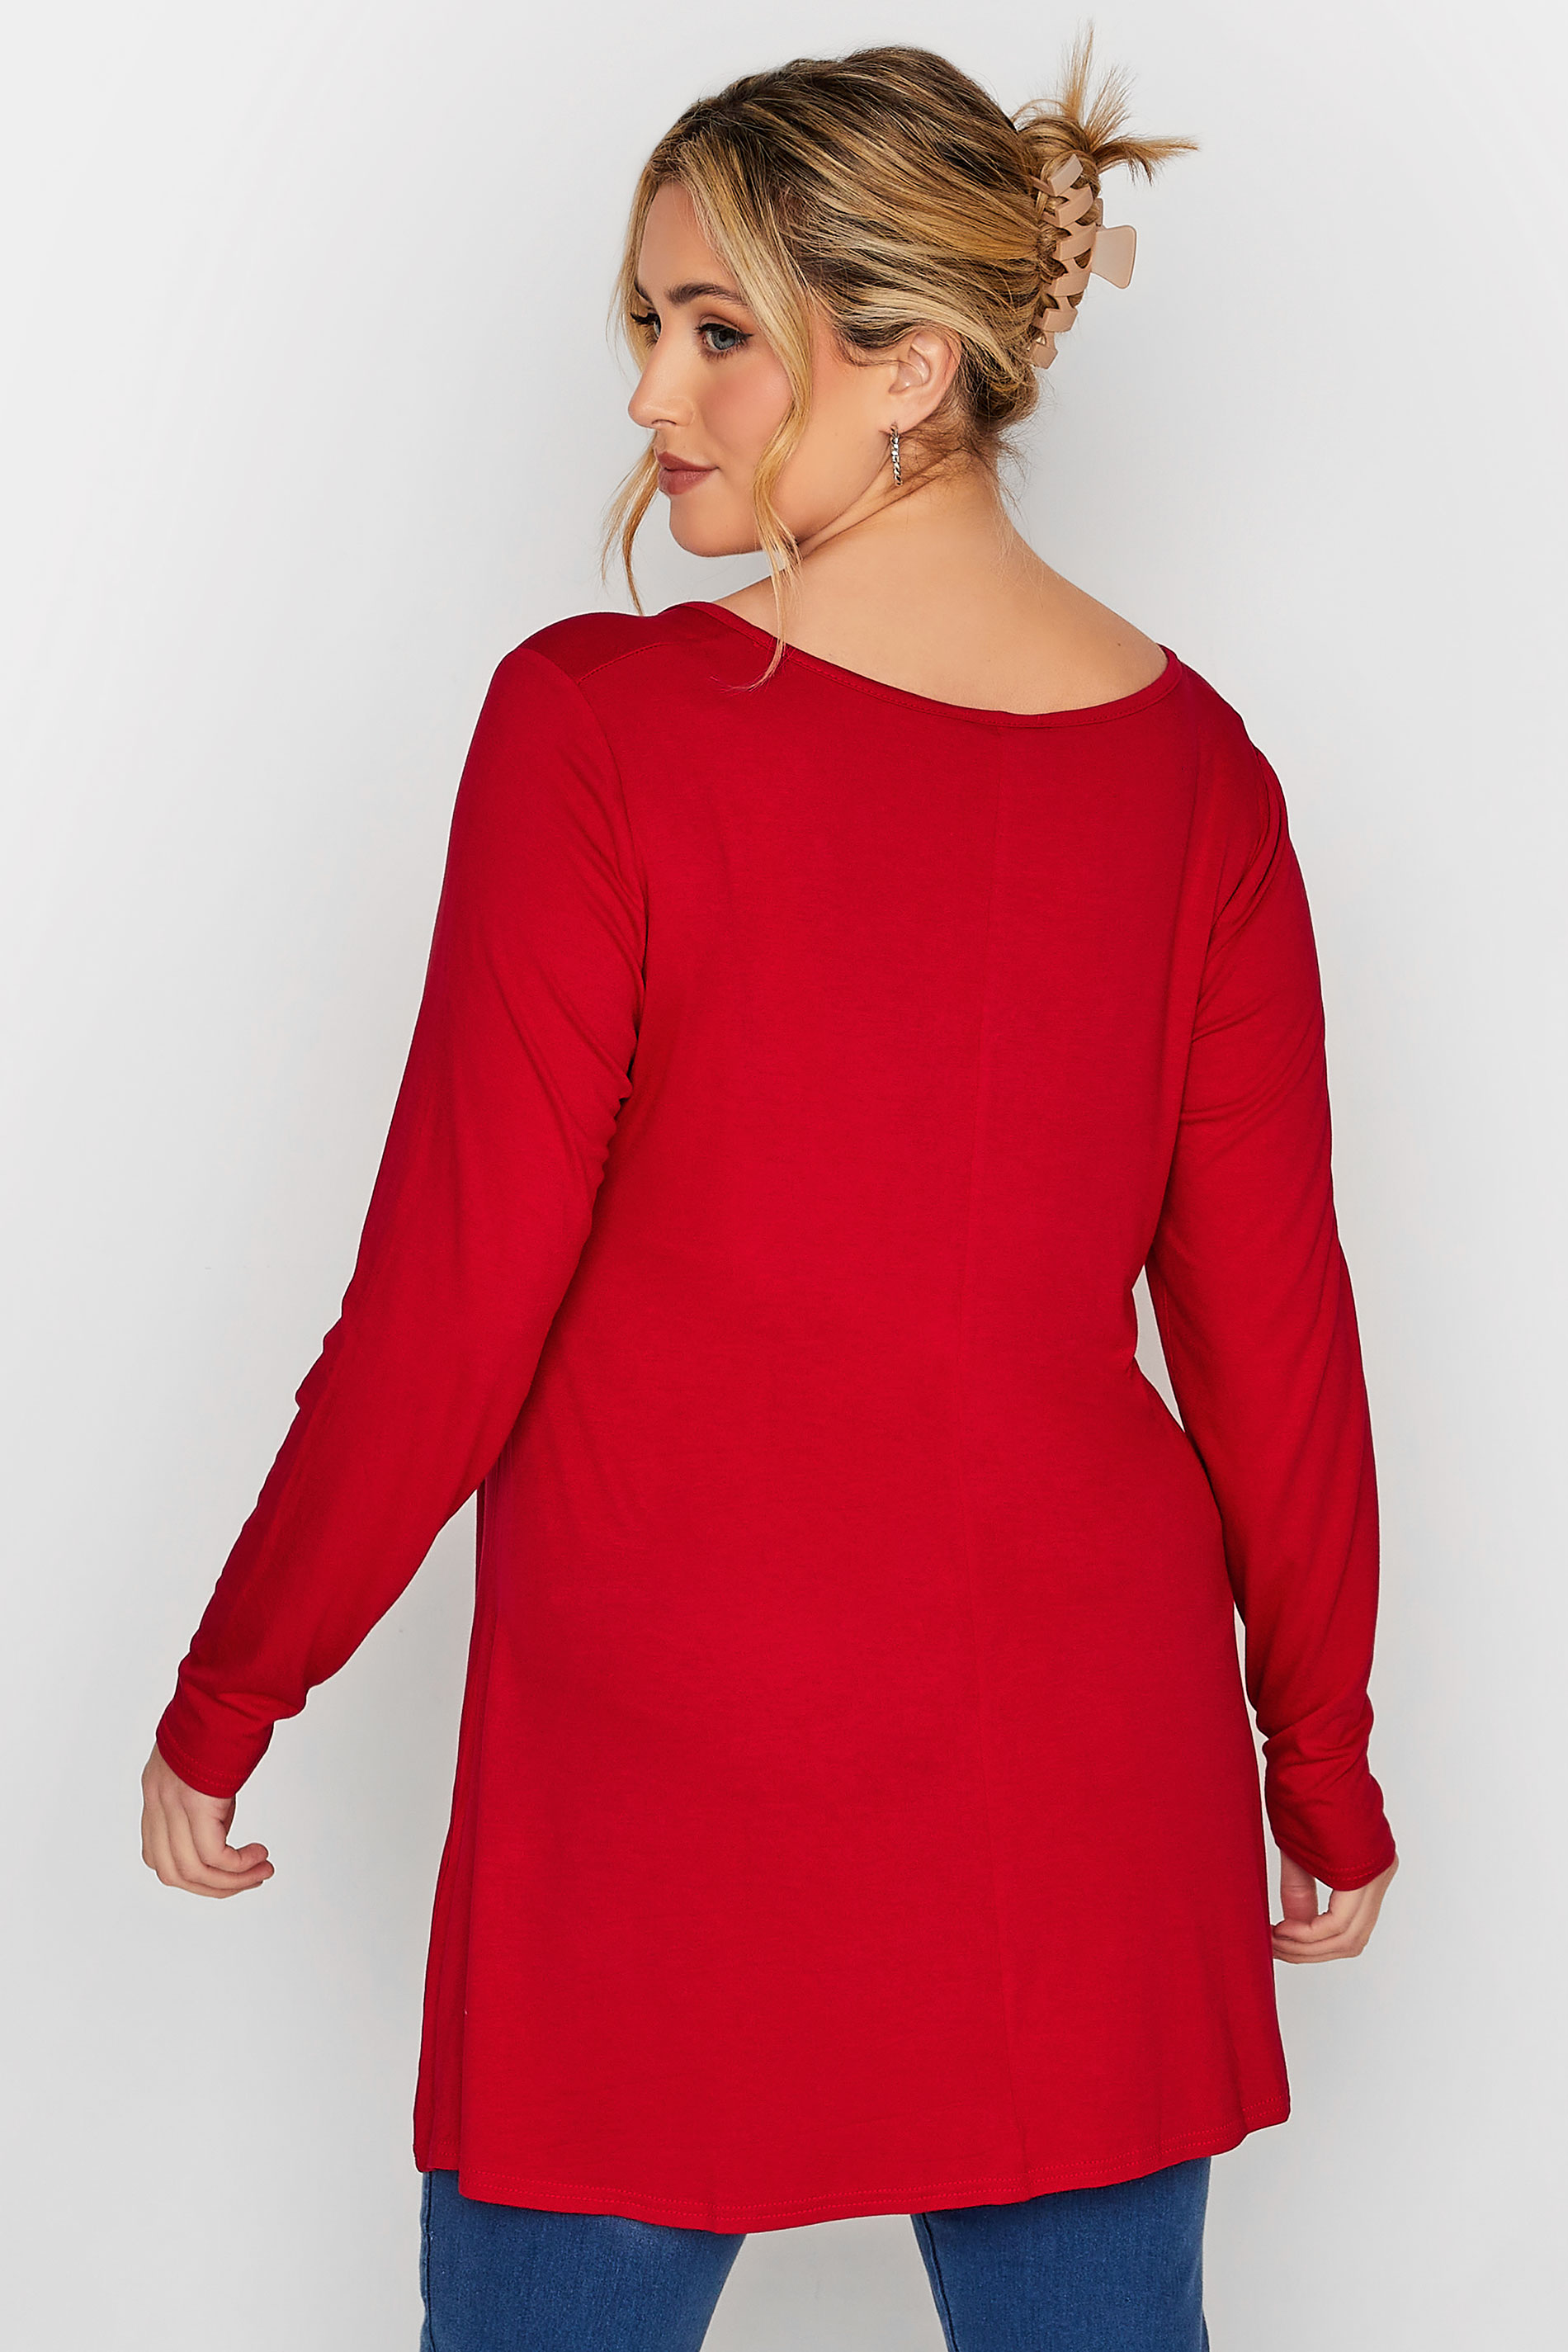 LIMITED COLLECTION Plus Size Red Heart Trim Cut Out Top | Yours Clothing 3